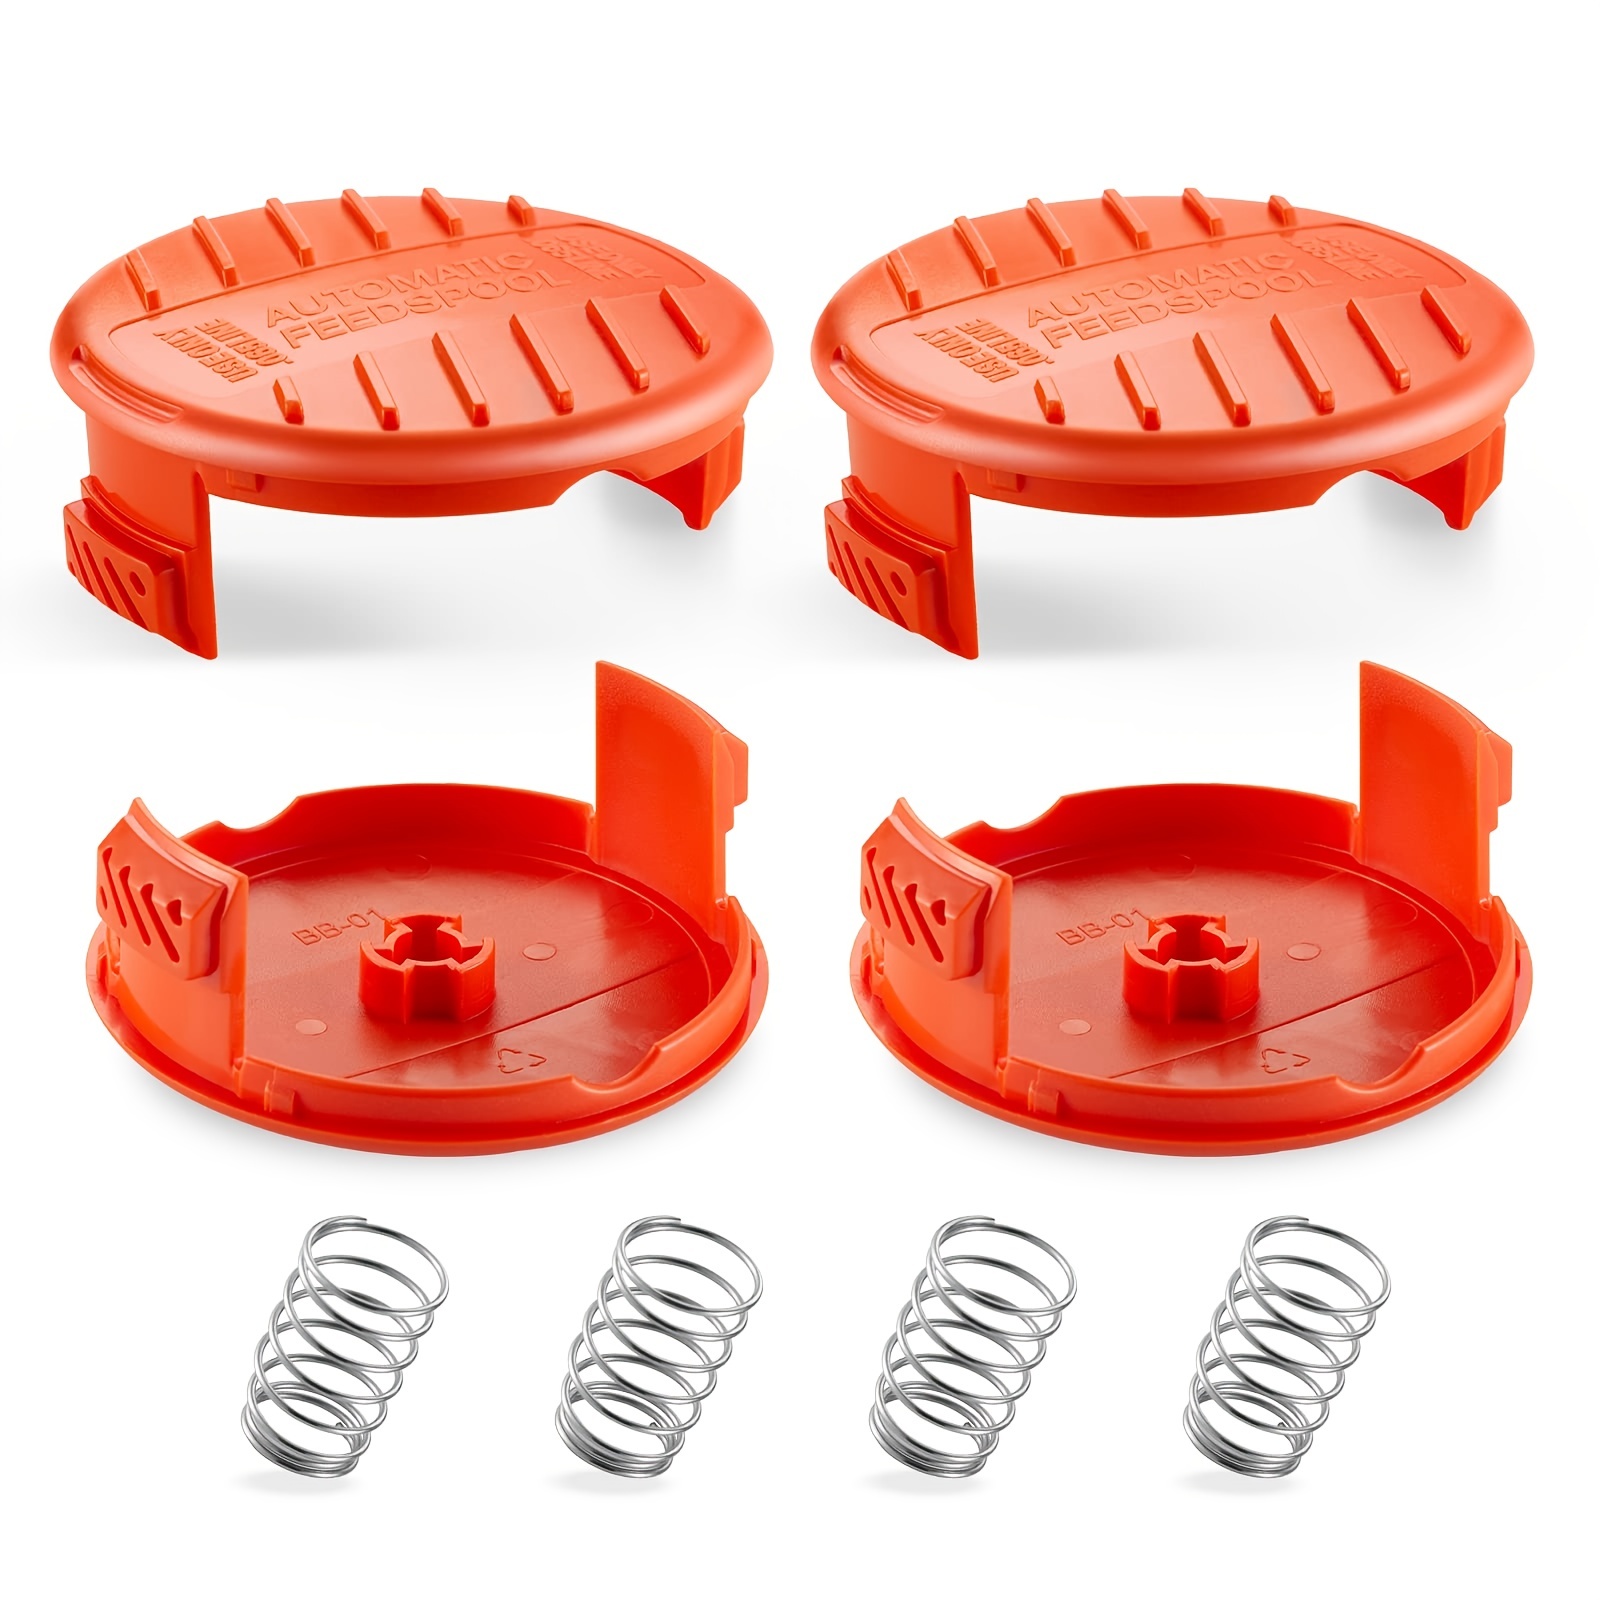 BLACK+DECKER RC-100-P Replacement Spool Cap for AFS String Trimmers 